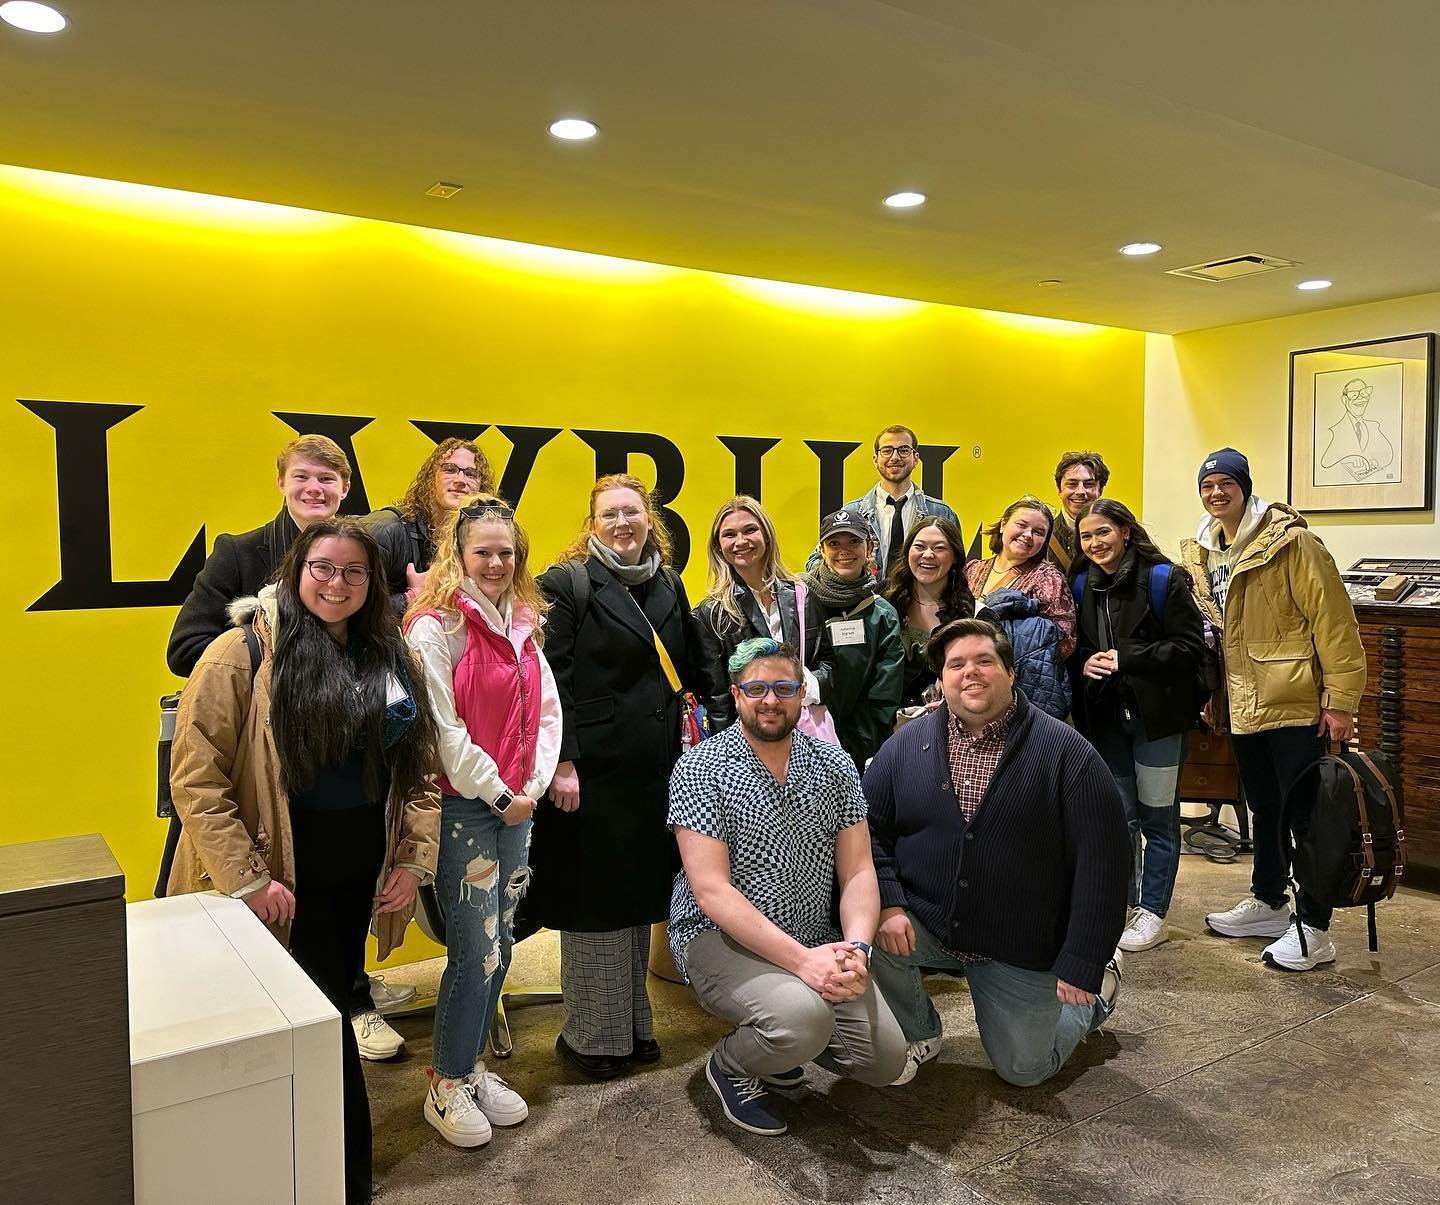 Exciting morning for our students participating in the &ldquo;Professional Prep&rdquo; section of the workshop as they visited the Playbill office, Broadway Cares/Equity Fights AIDS, and the Westside Theatre!